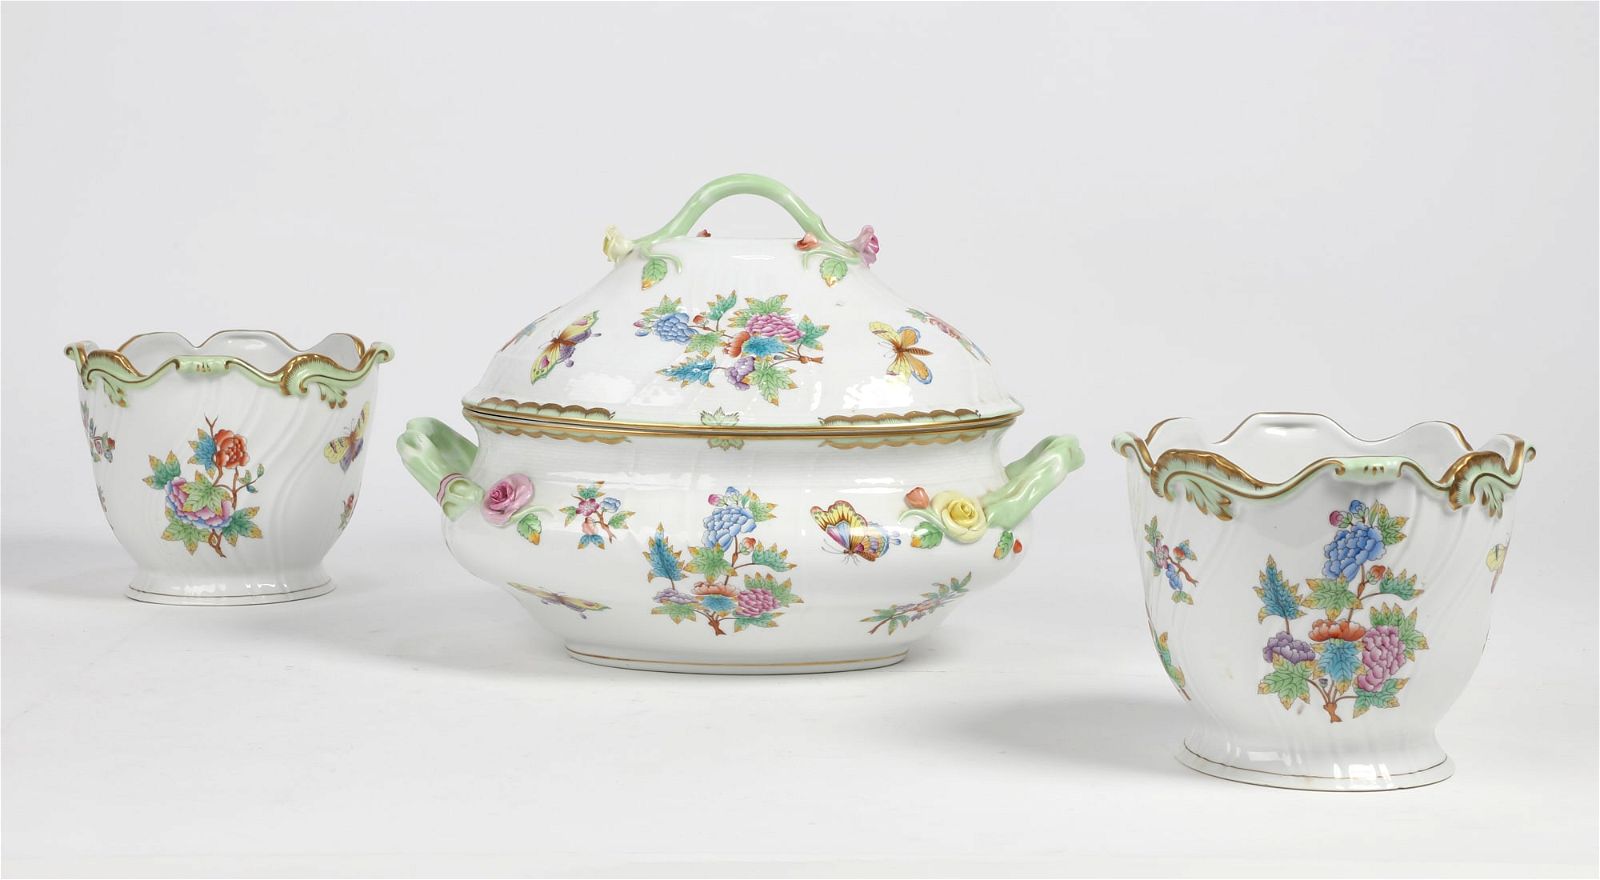 A GROUP OF THREE HEREND PORCELAIN